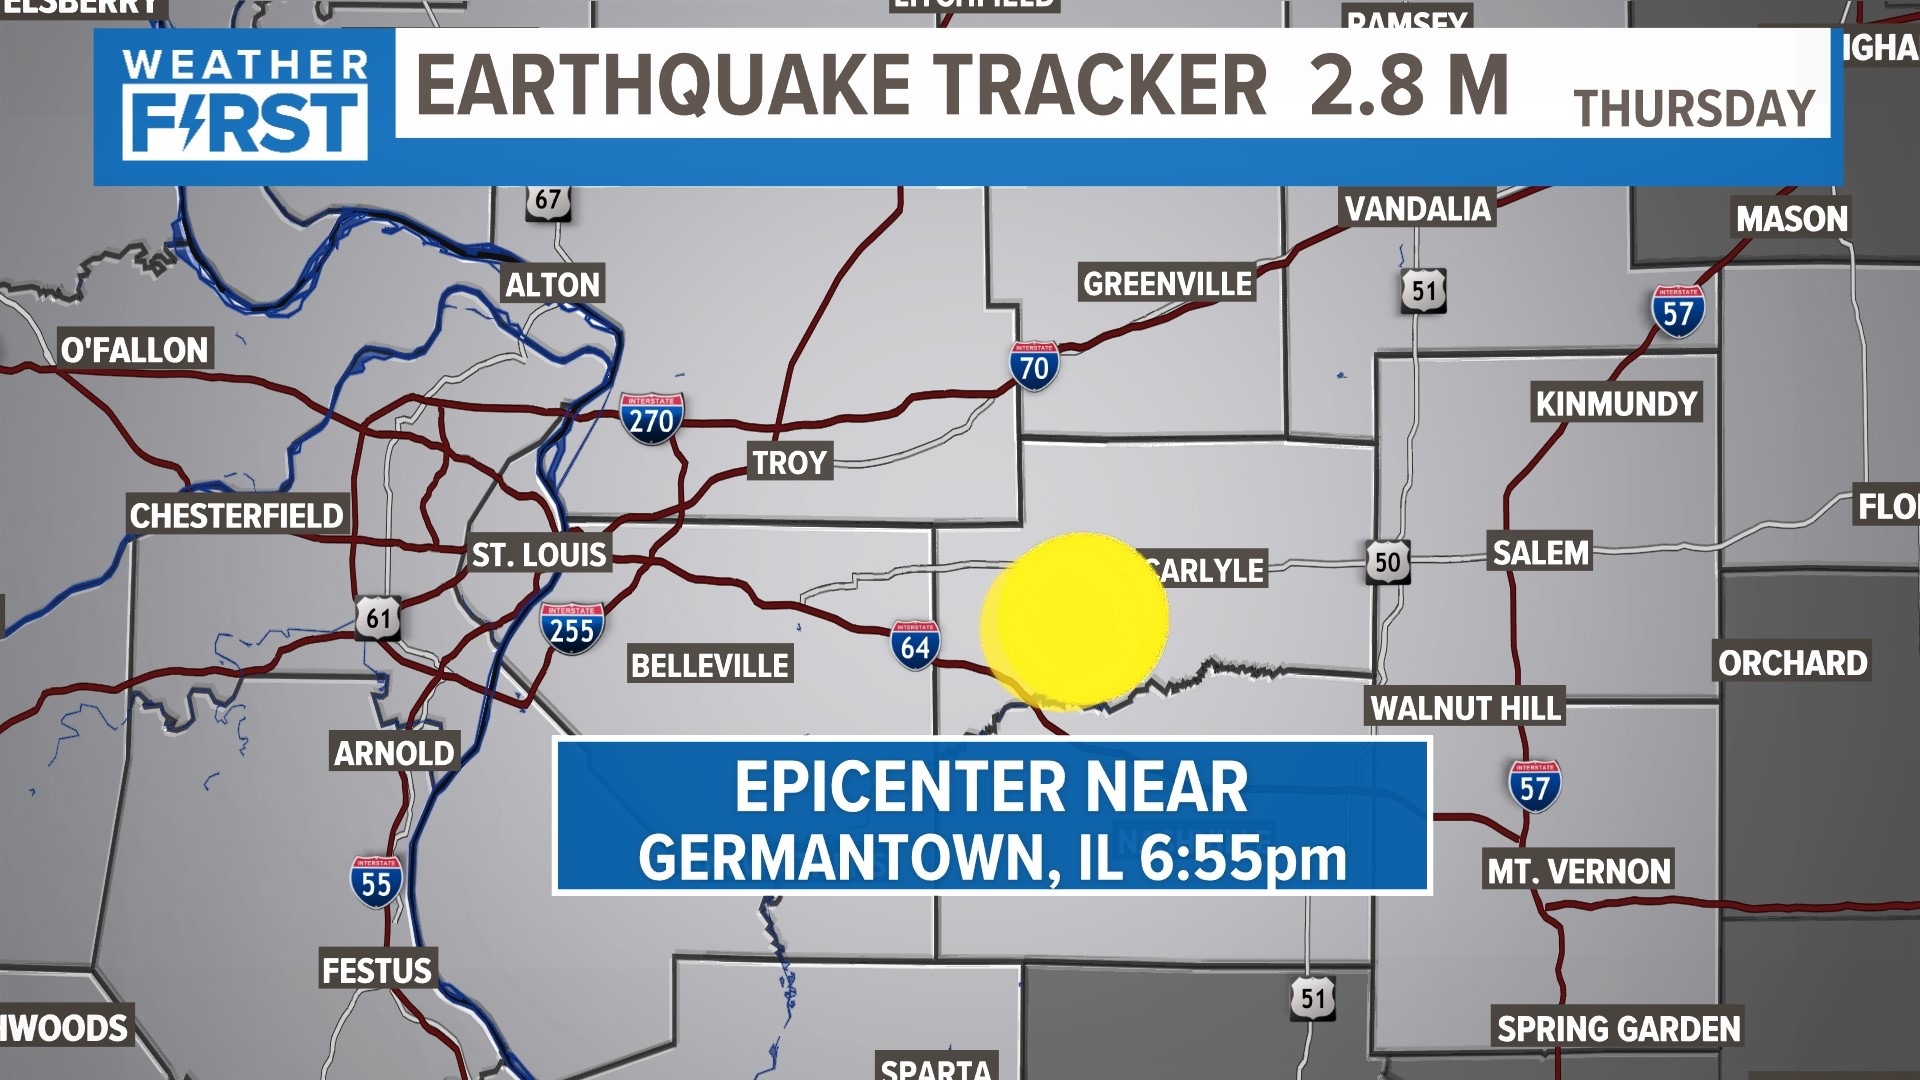 The U.S. Geological Survey reported the earthquake occurred at 6:55 p.m. near Germantown, a small village in Clinton County.